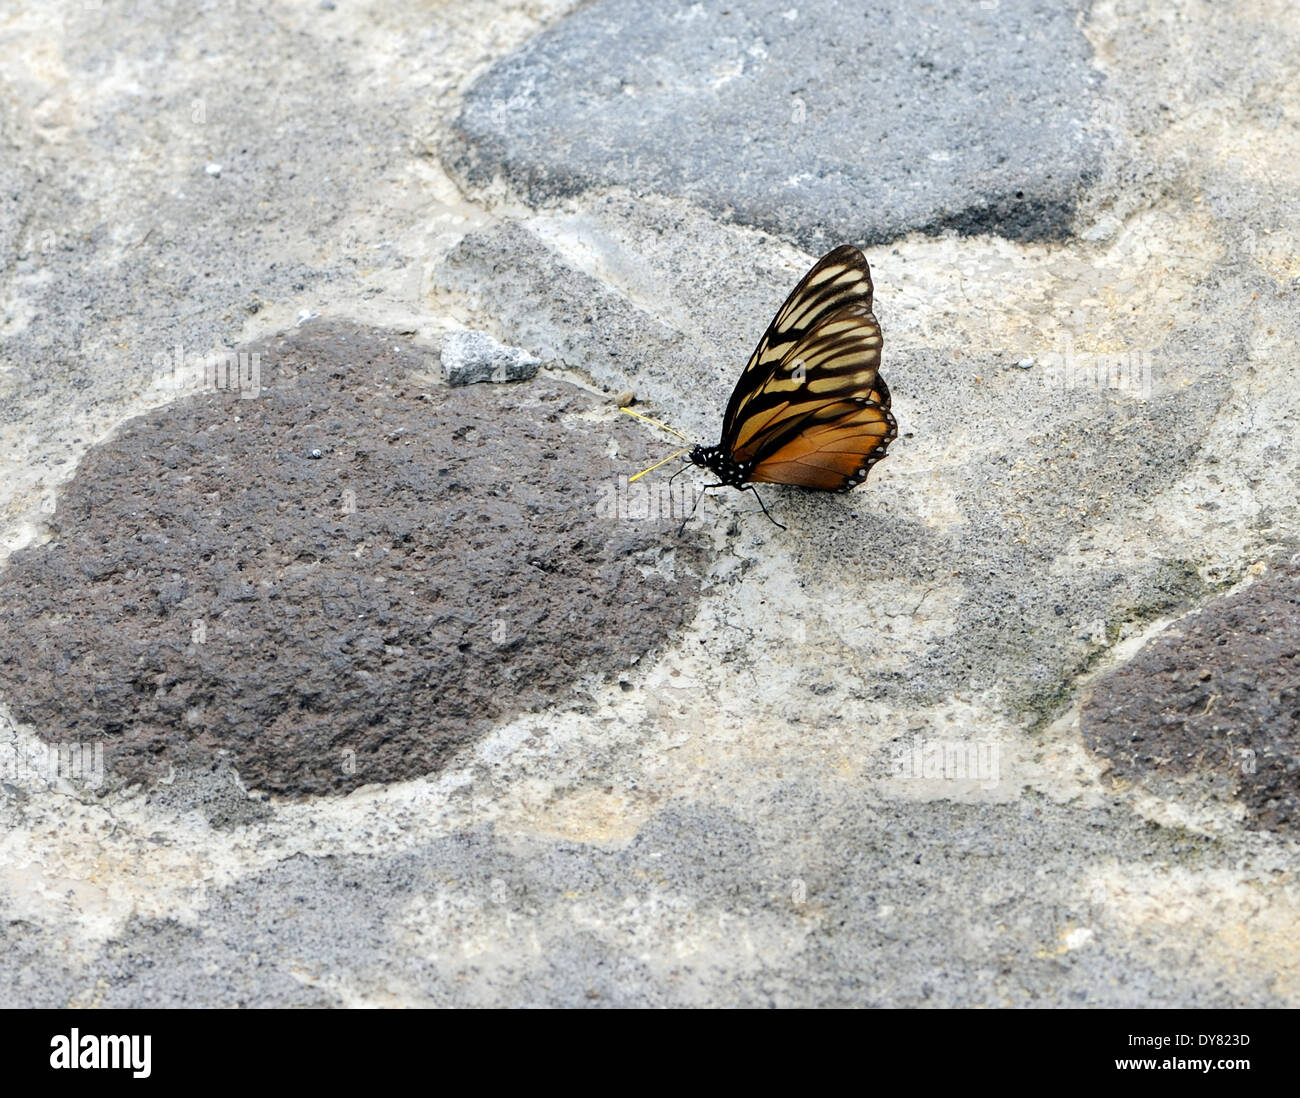 A brown and black butterfly with yellow antennae rests on a stone pavement. It appears to be sucking liquid from the stone Stock Photo